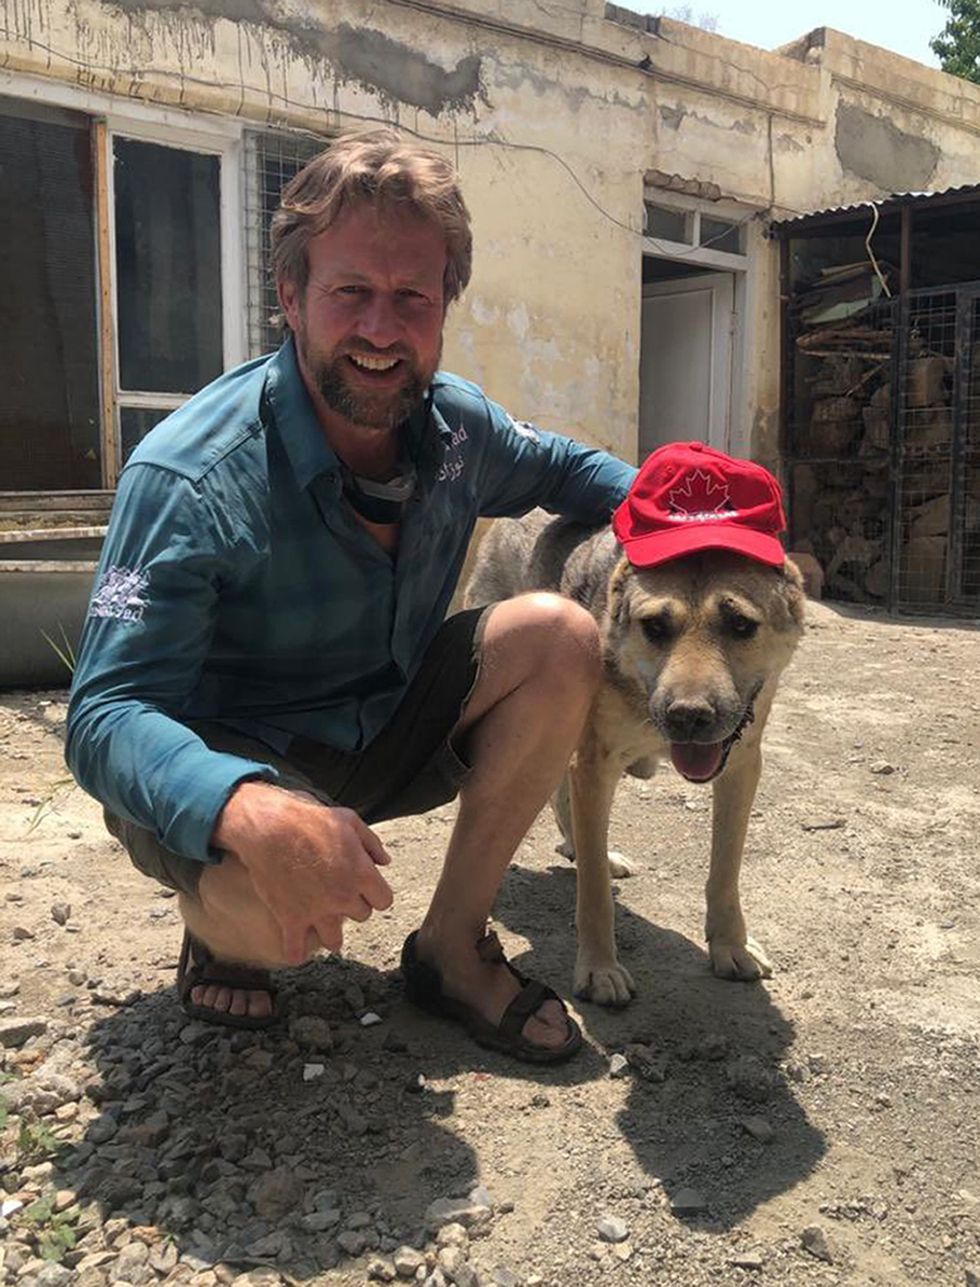 Defence Secretary Ben Wallace has said supporters of the former Royal Marine seeking to evacuate animals from Afghanistan have "taken up too much time" of senior commanders dealing with the humanitarian crisis.